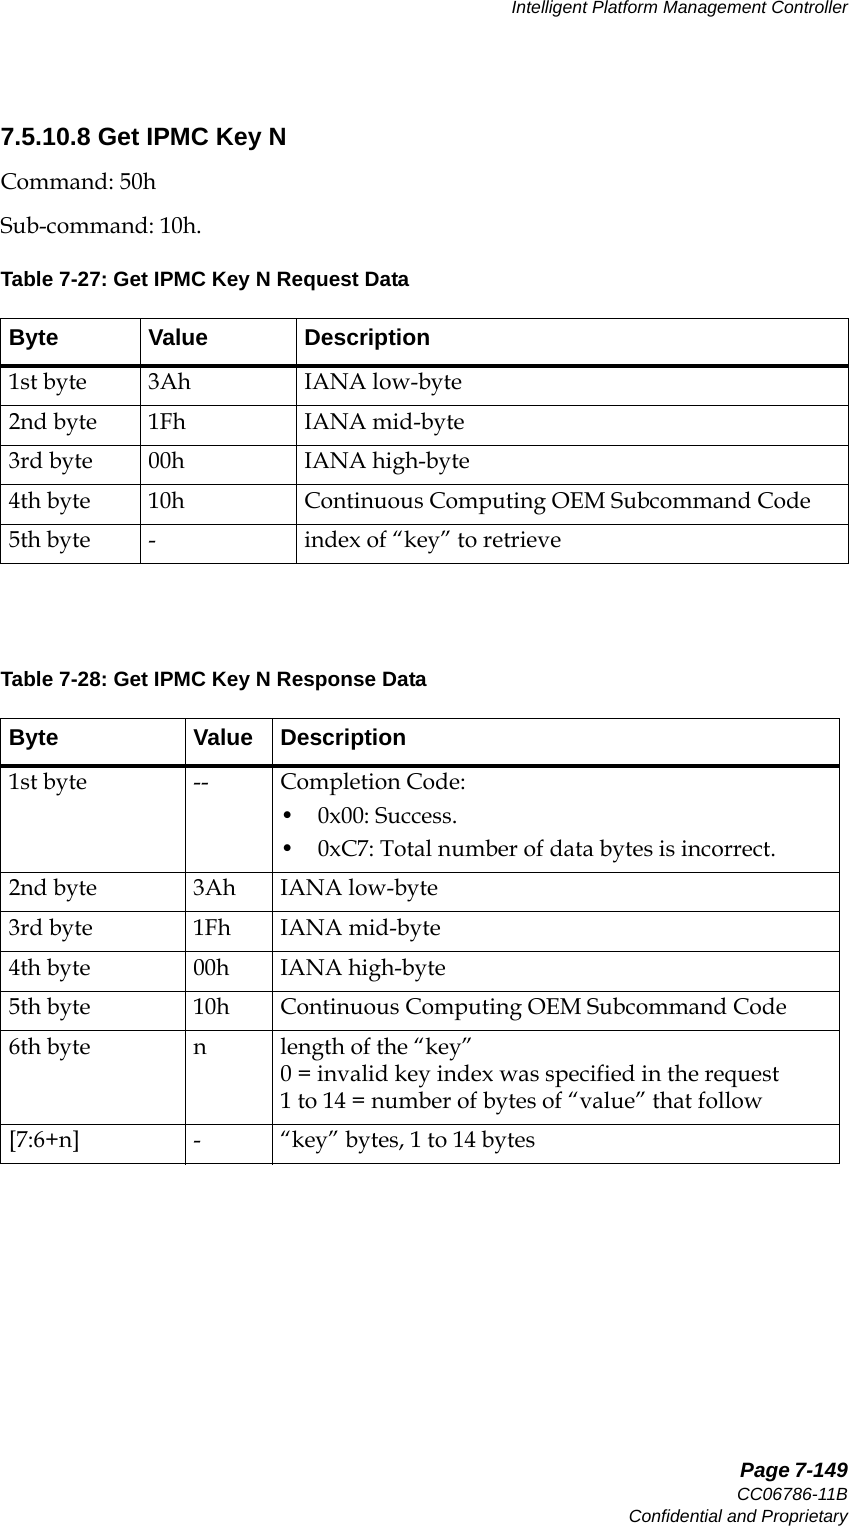   Page 7-149CC06786-11BConfidential and ProprietaryIntelligent Platform Management Controller14ABABPreliminary7.5.10.8 Get IPMC Key NCommand: 50hSub-command: 10h.Table 7-27: Get IPMC Key N Request DataByte Value Description1st byte 3Ah IANA low-byte2nd byte 1Fh IANA mid-byte3rd byte 00h IANA high-byte4th byte 10h Continuous Computing OEM Subcommand Code5th byte - index of “key” to retrieveTable 7-28: Get IPMC Key N Response DataByte Value Description1st byte -- Completion Code:• 0x00: Success.• 0xC7: Total number of data bytes is incorrect.2nd byte 3Ah IANA low-byte3rd byte 1Fh IANA mid-byte4th byte 00h IANA high-byte5th byte 10h Continuous Computing OEM Subcommand Code6th byte n length of the “key”0 = invalid key index was specified in the request1 to 14 = number of bytes of “value” that follow[7:6+n] - “key” bytes, 1 to 14 bytes